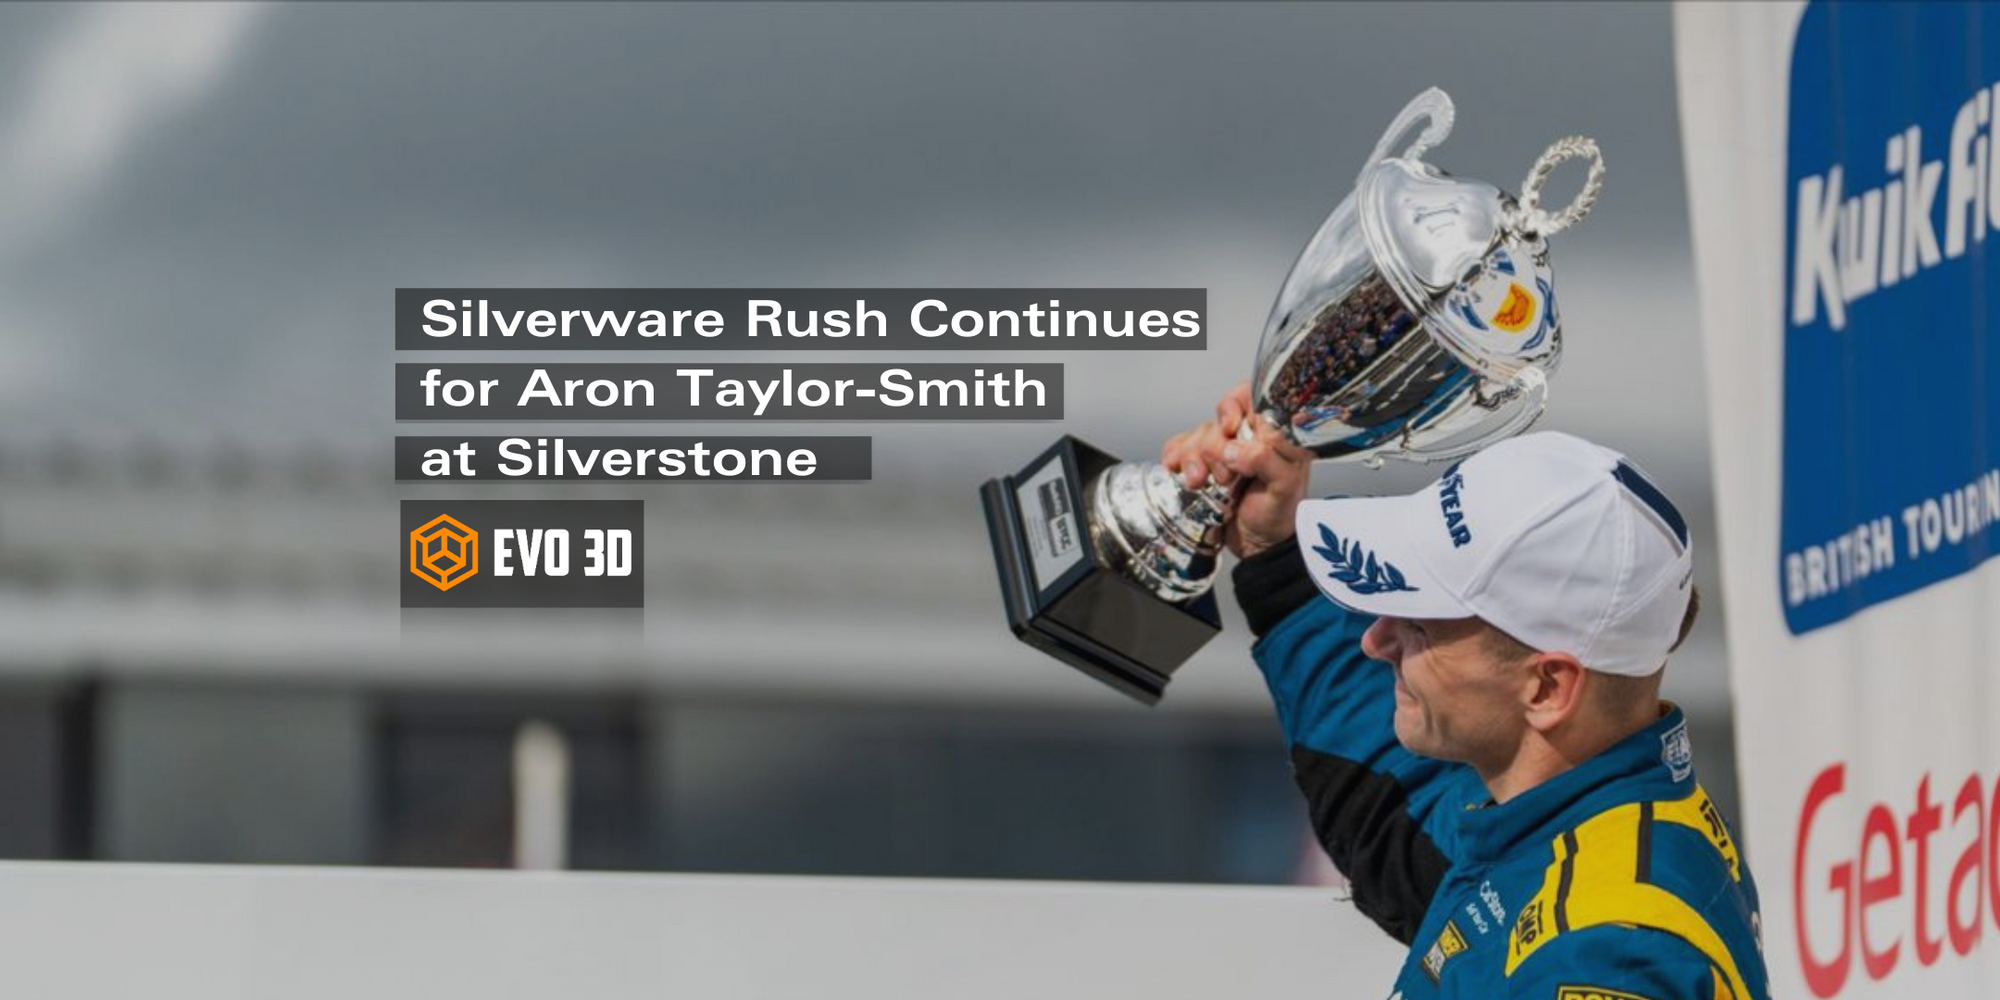 Silverware rush continues for Aron Taylor-Smith at Silverstone